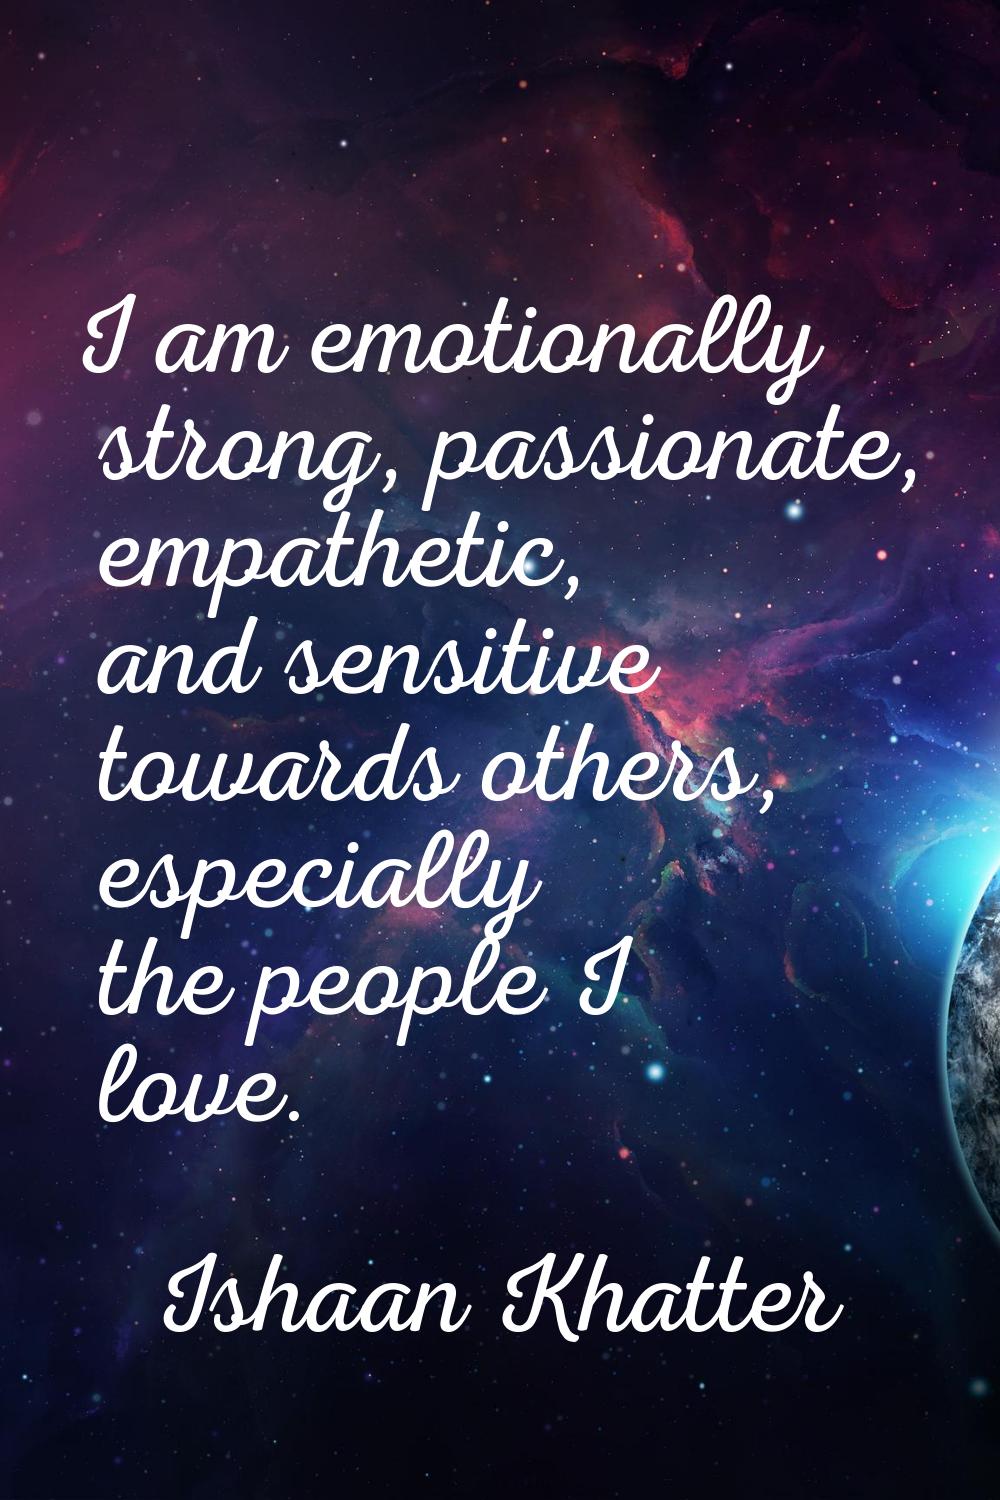 I am emotionally strong, passionate, empathetic, and sensitive towards others, especially the peopl